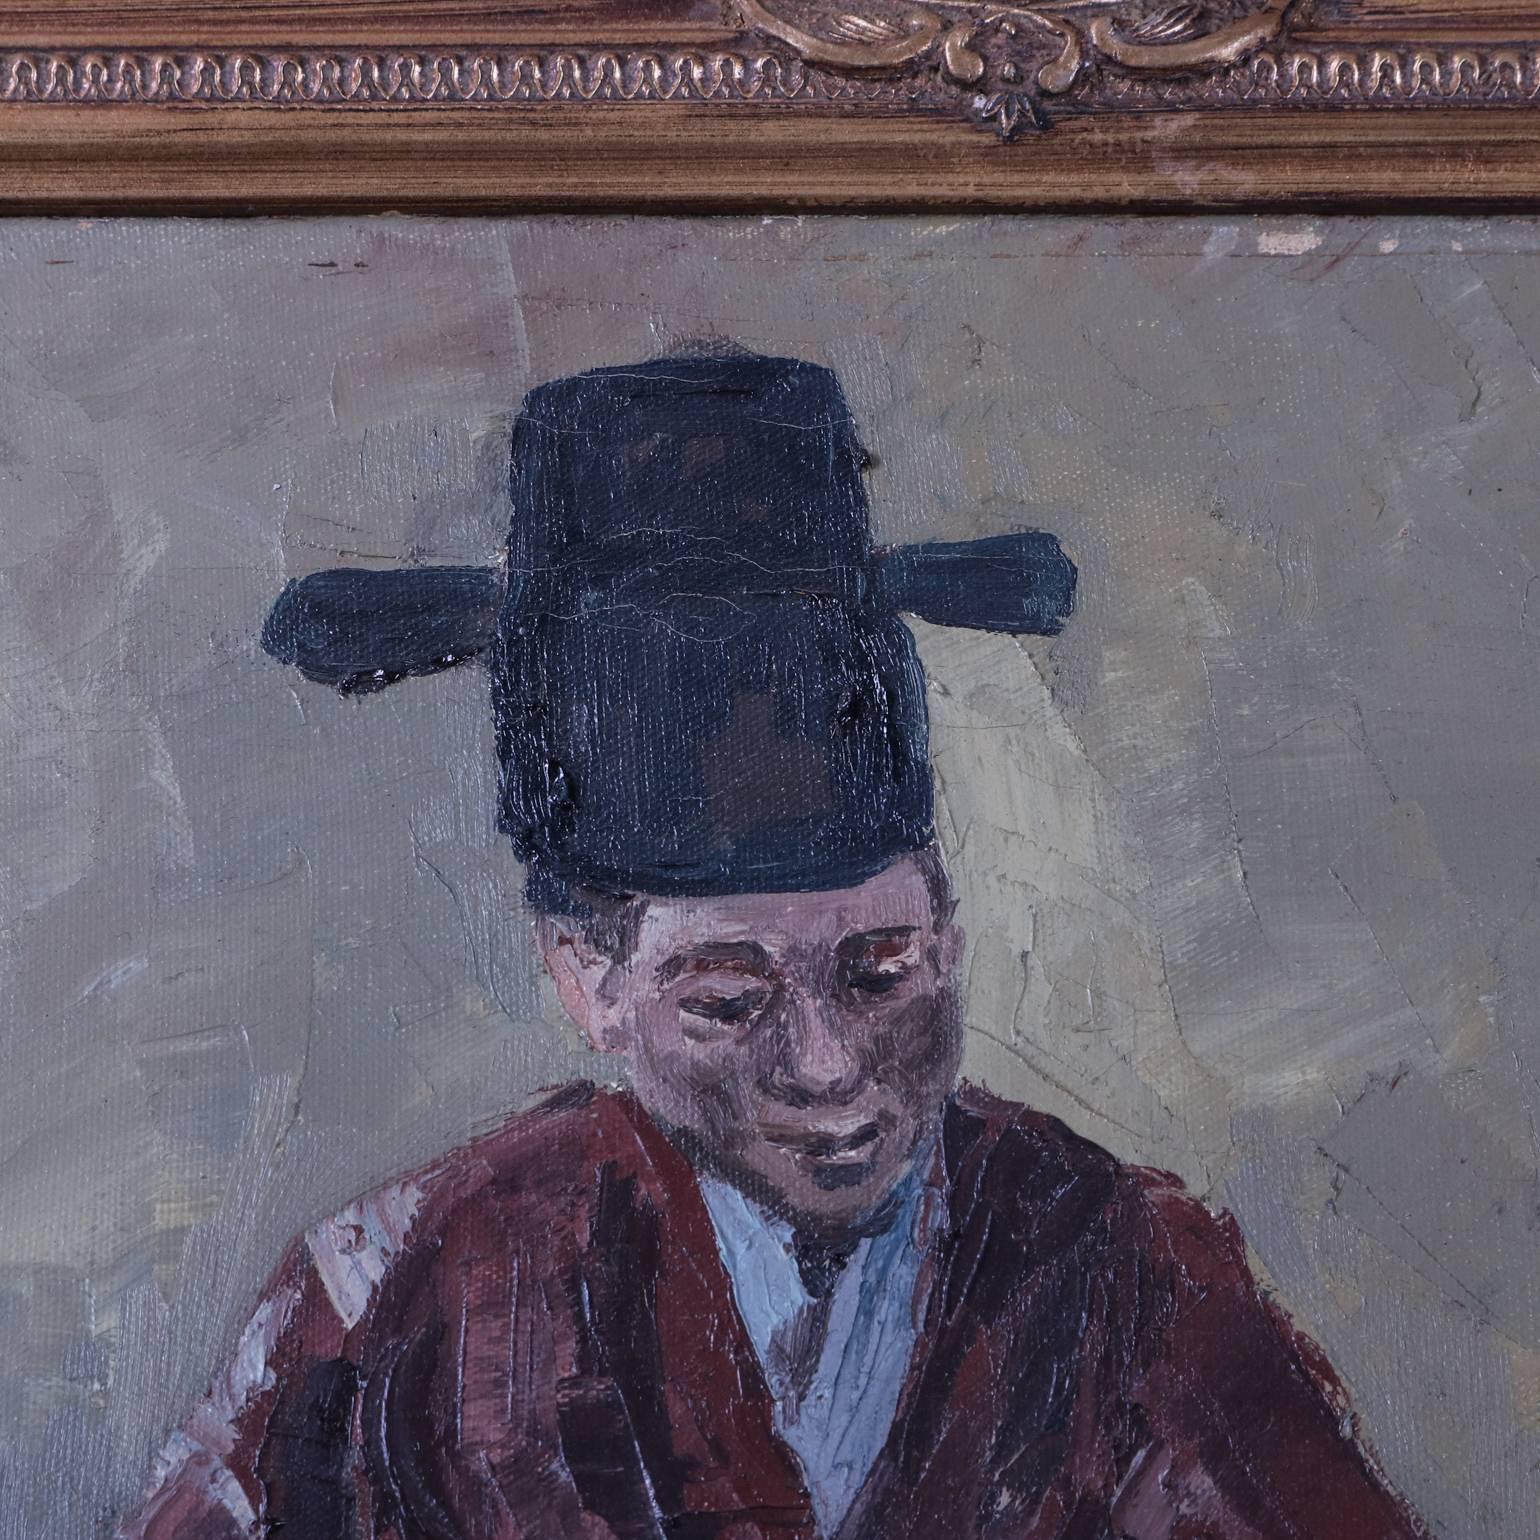 Chinese oil on canvas painting depicts Chinese musician in traditional garb paying his guqin, giltwood surround, Artist-signed chop marks bottom left, 20th century.

***DELIVERY NOTICE – Due to COVID-19 we are employing NO-CONTACT PRACTICES in the